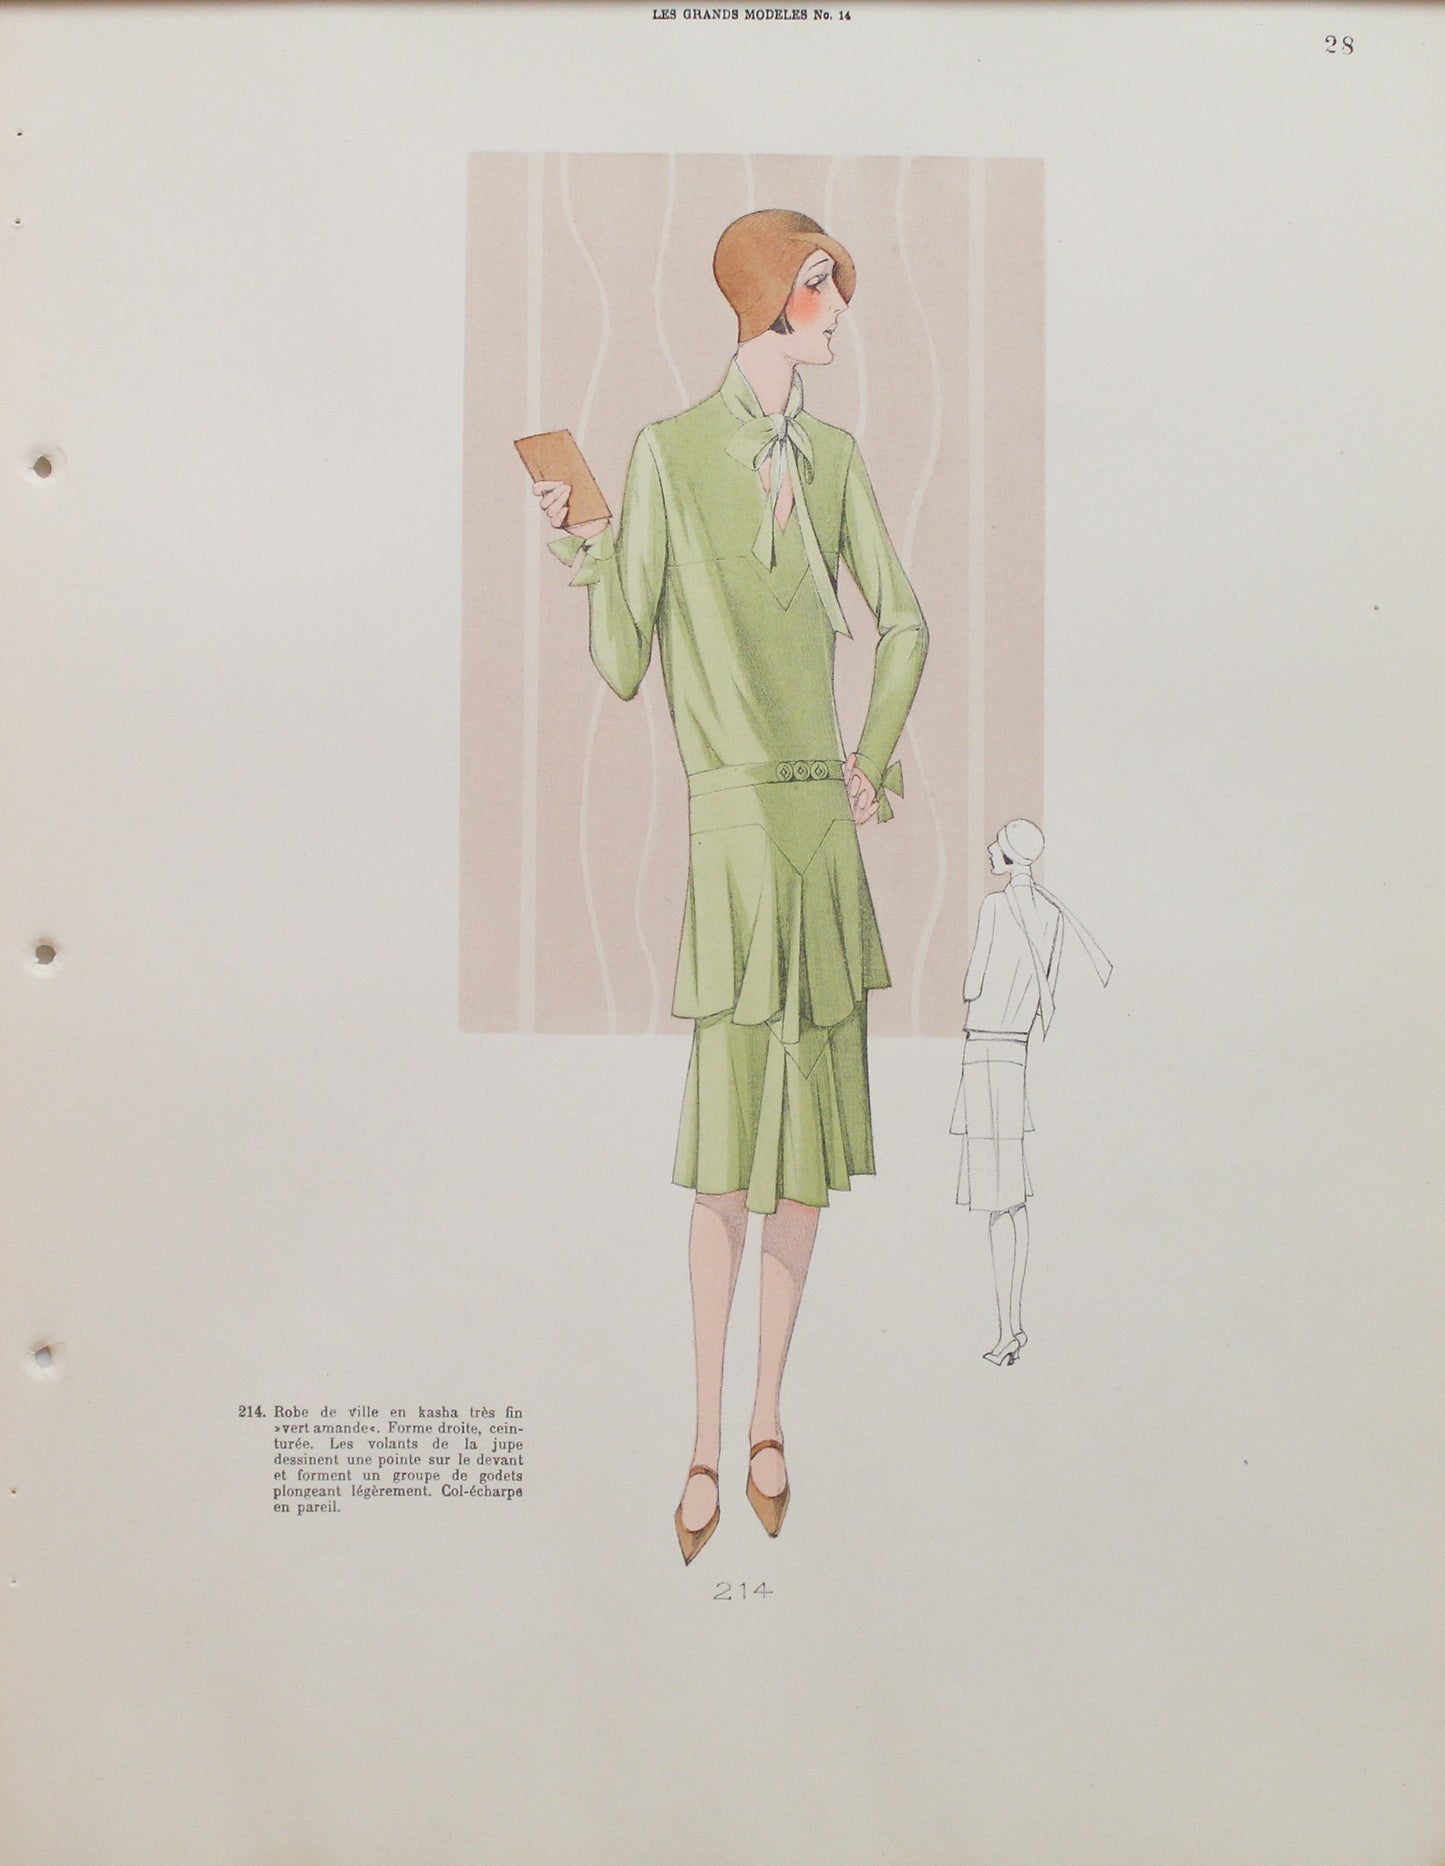 Fashion, Les Grands Models, #14, Page 28, Outfit 214, 1920 - 1929